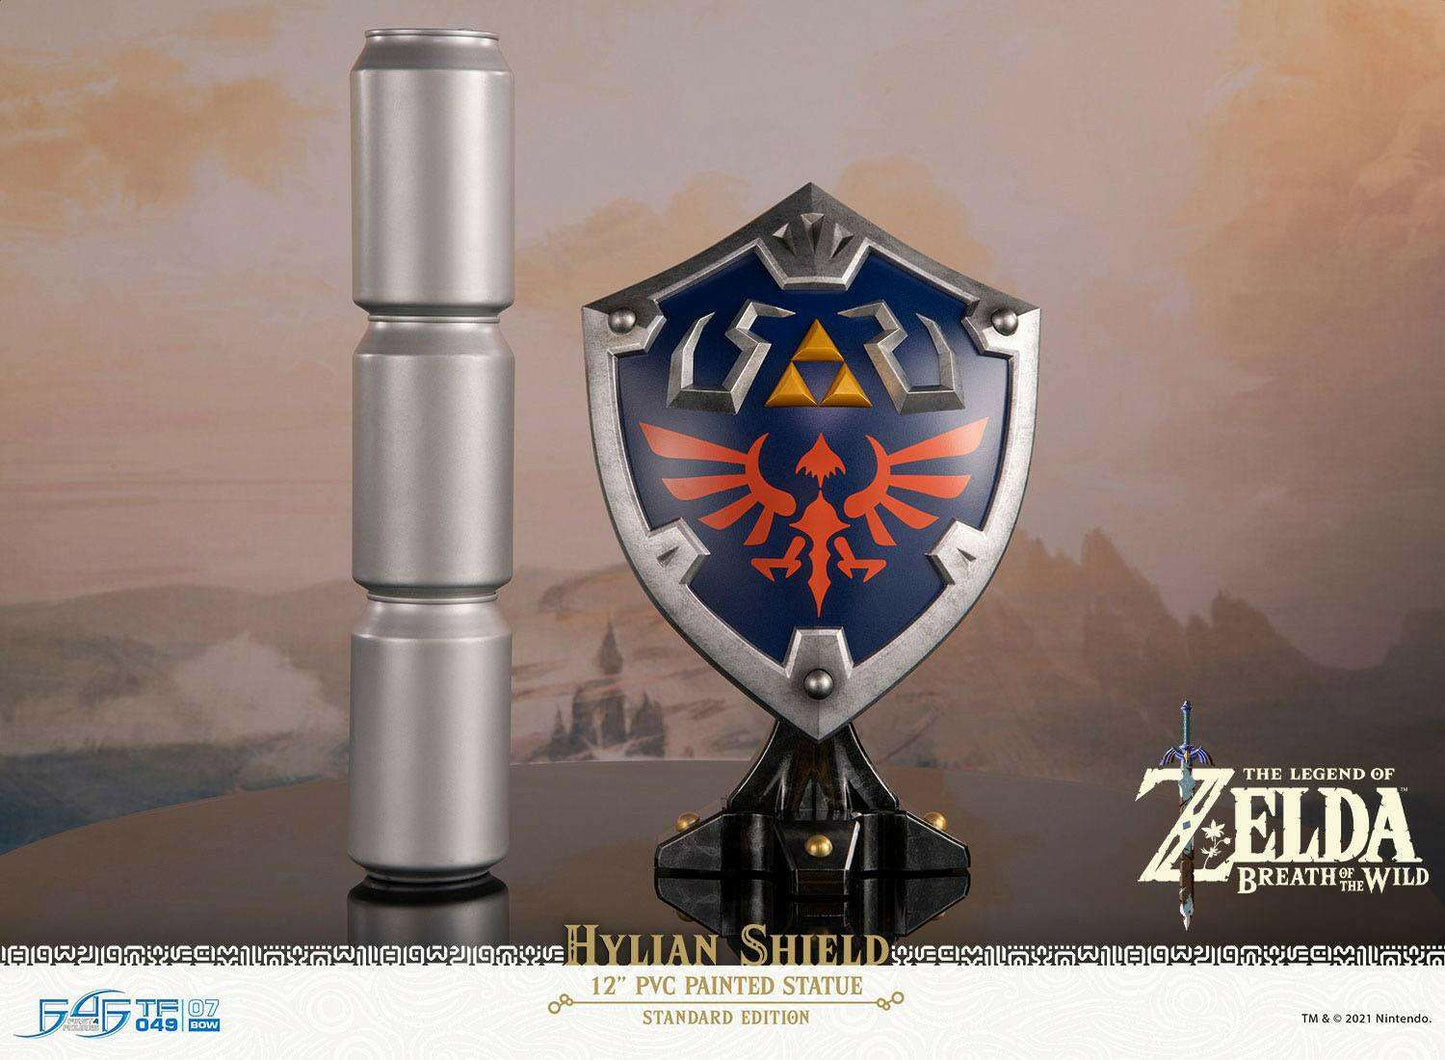 First4Figures The Legend of Zelda Breath of the Wild PVC Statue Hylian Shield Standard Edition 29cm First4Figures